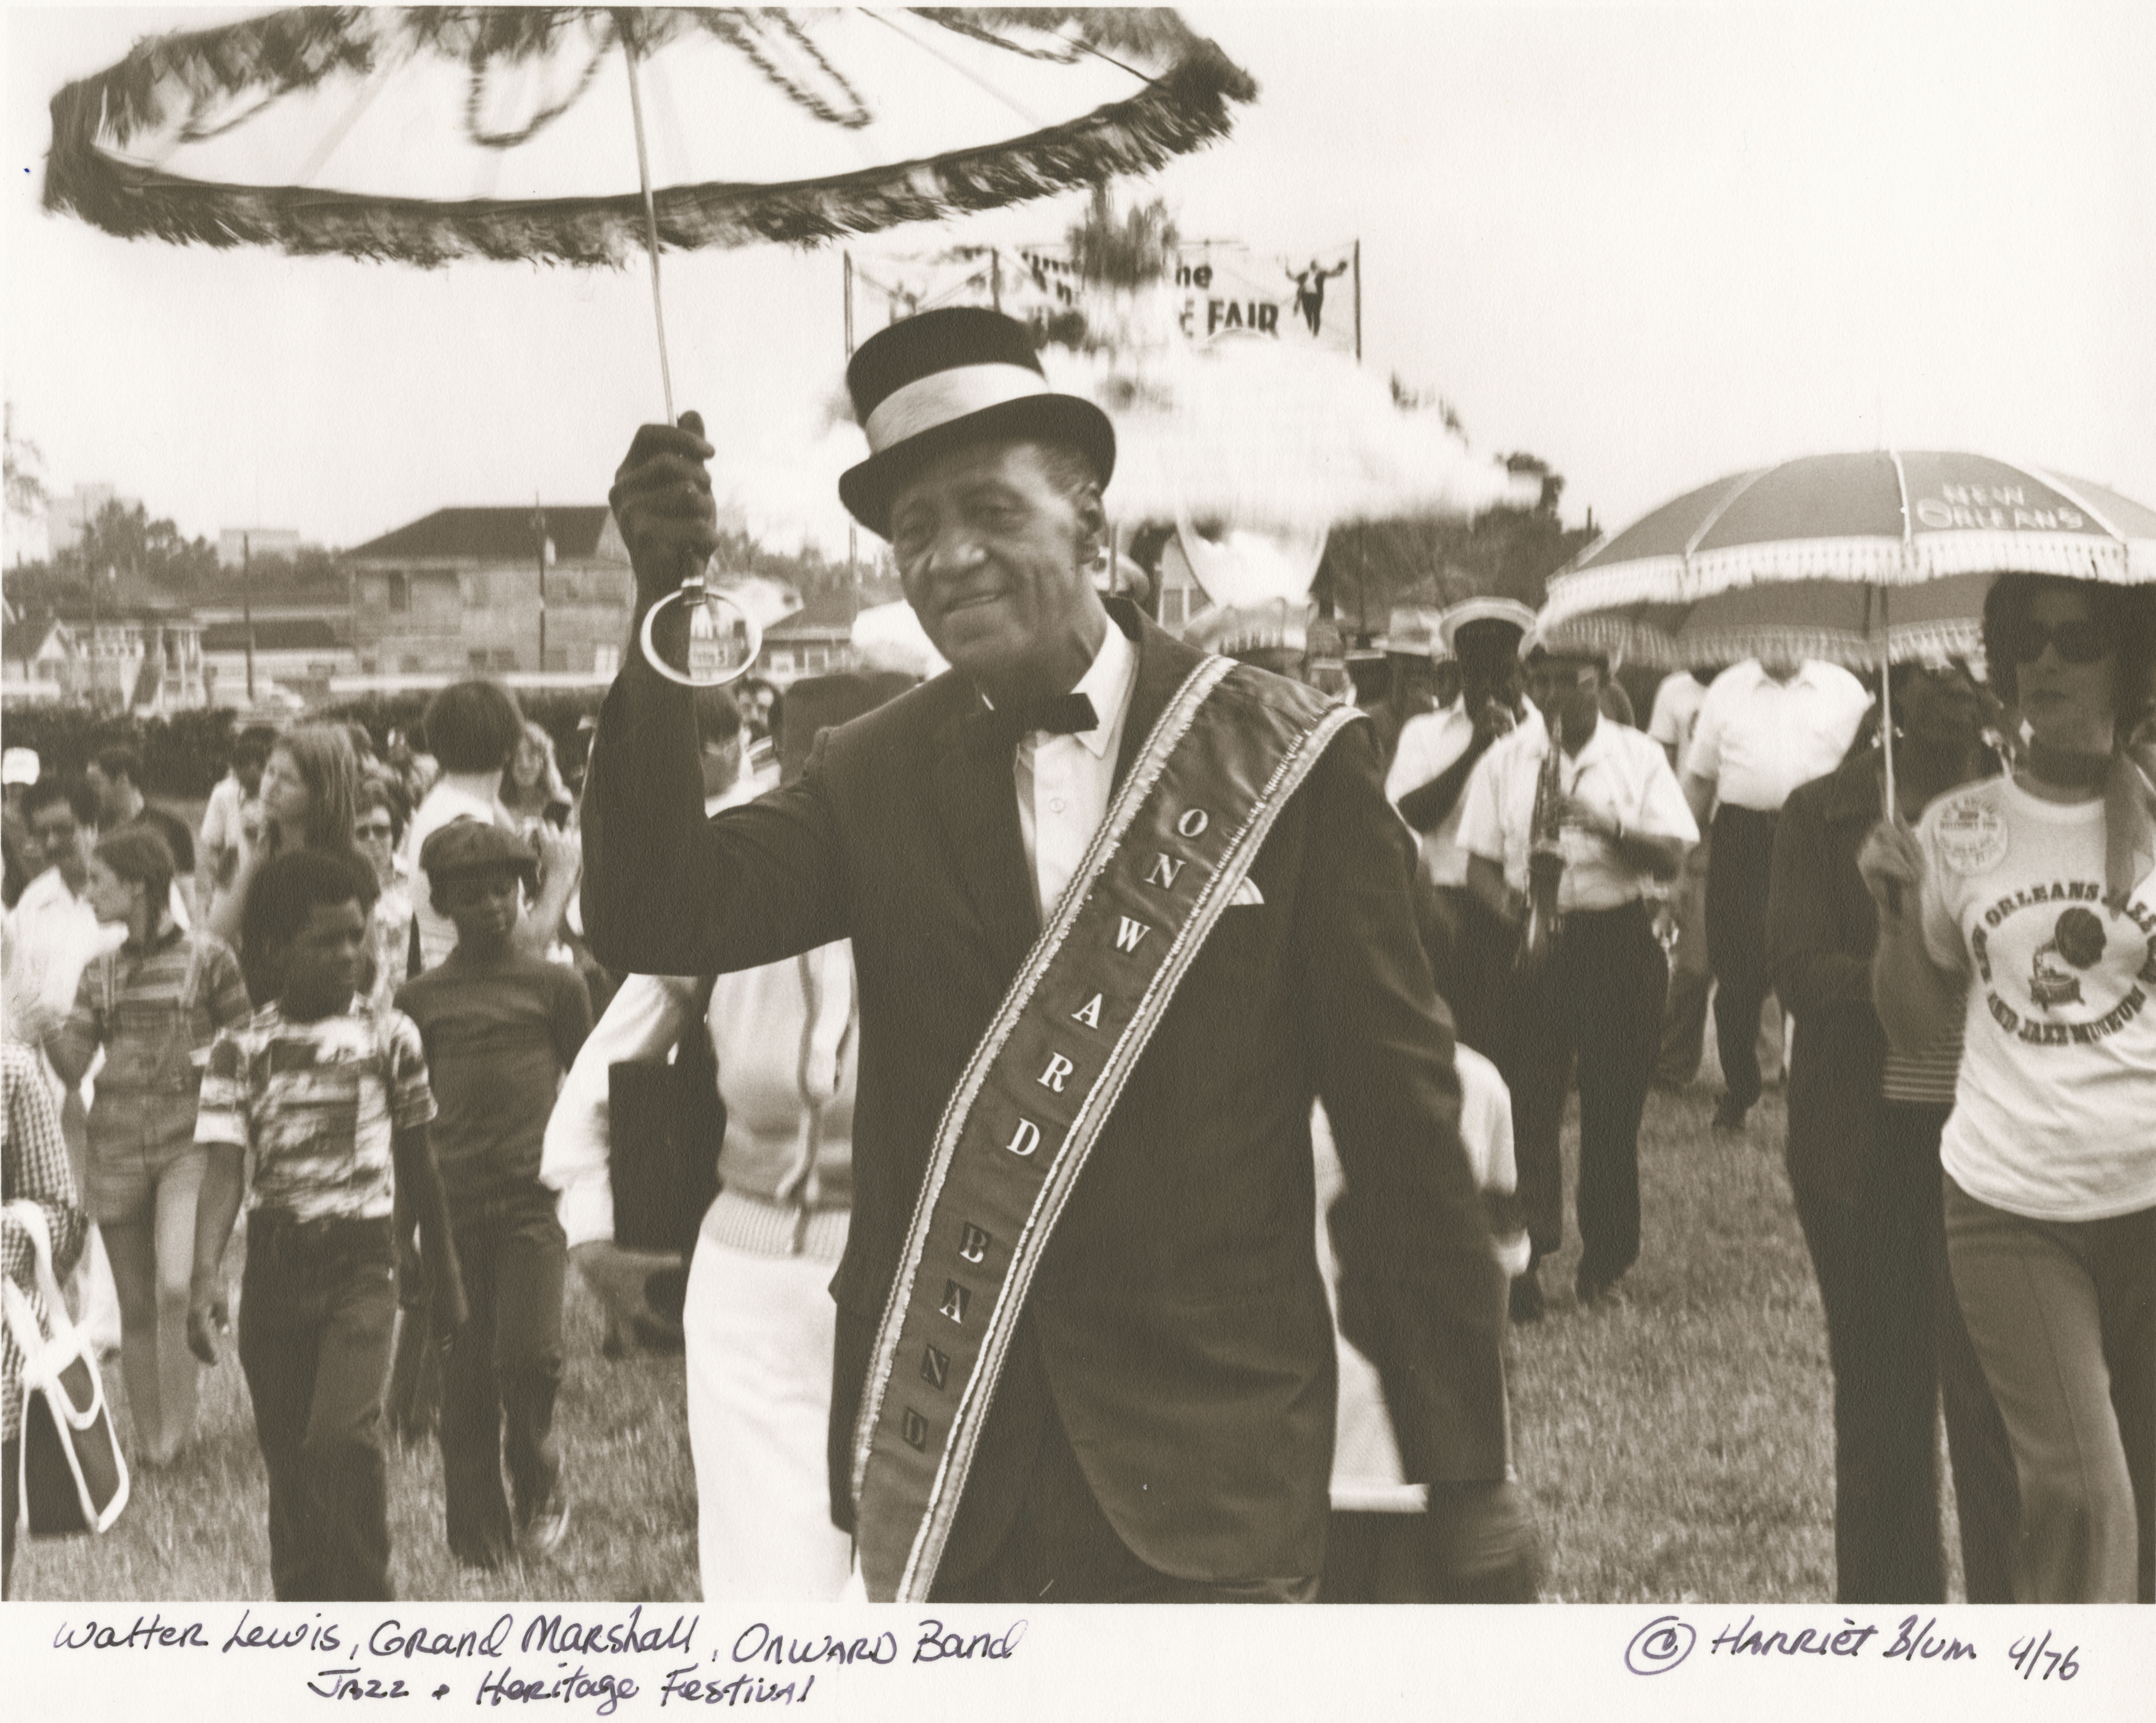 Photo: Grand Marshall Walter Lewis marches with the Onward Brass Band at Jazz Fest, 1976, photographer: Harriet Blum, Hogan Archive Photography Collection, PH003075, Tulane University Special Collections.